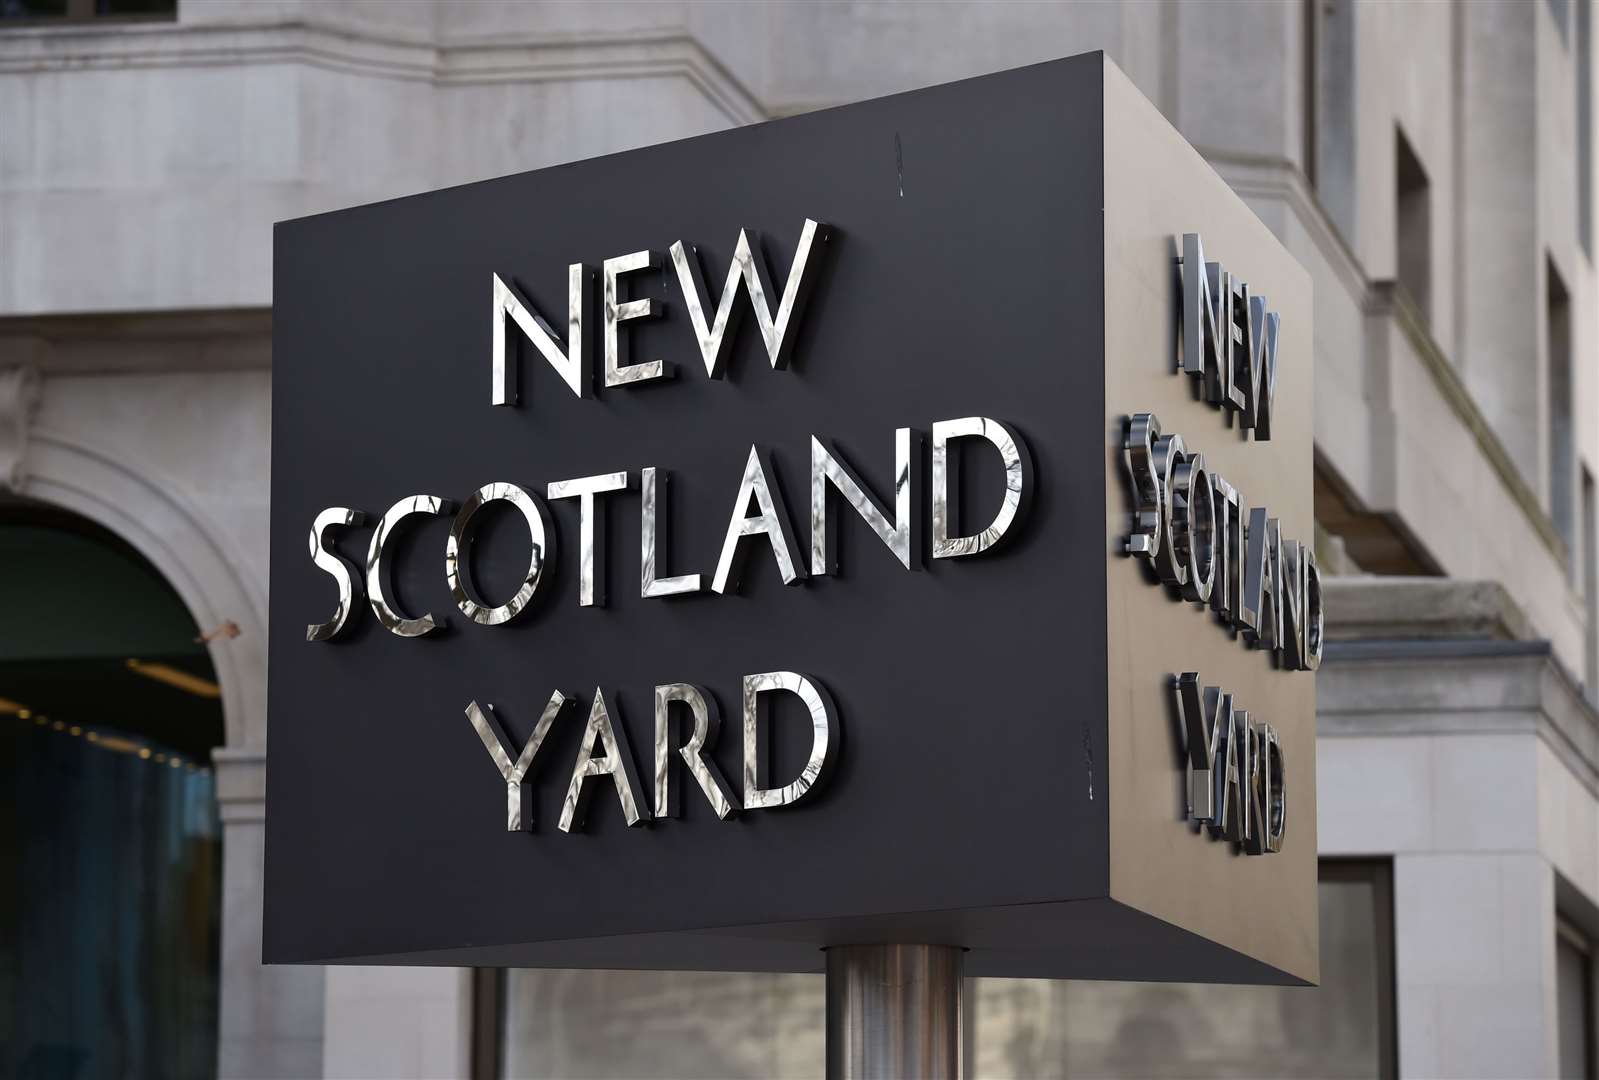 Scotland Yard launched an investigation into the allegation against MP Julian Knight in December (Kirsty O’Connor/PA)